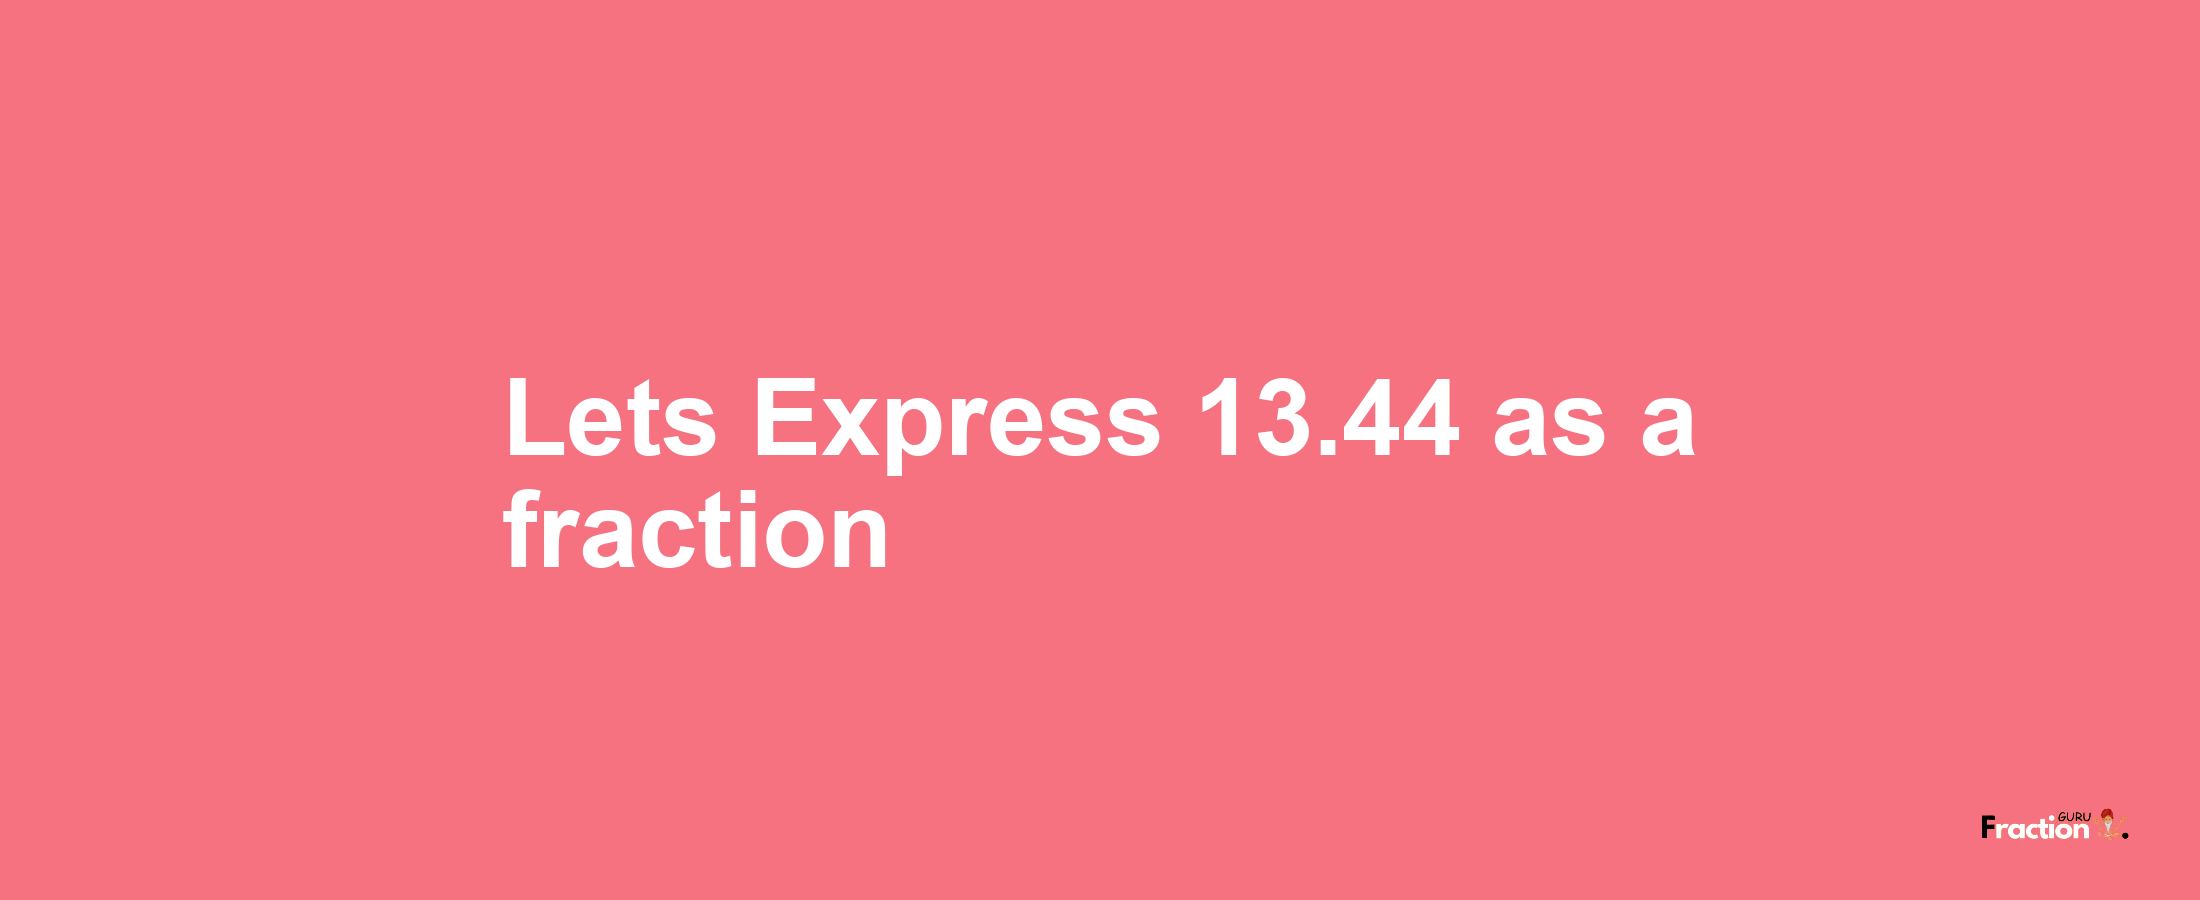 Lets Express 13.44 as afraction